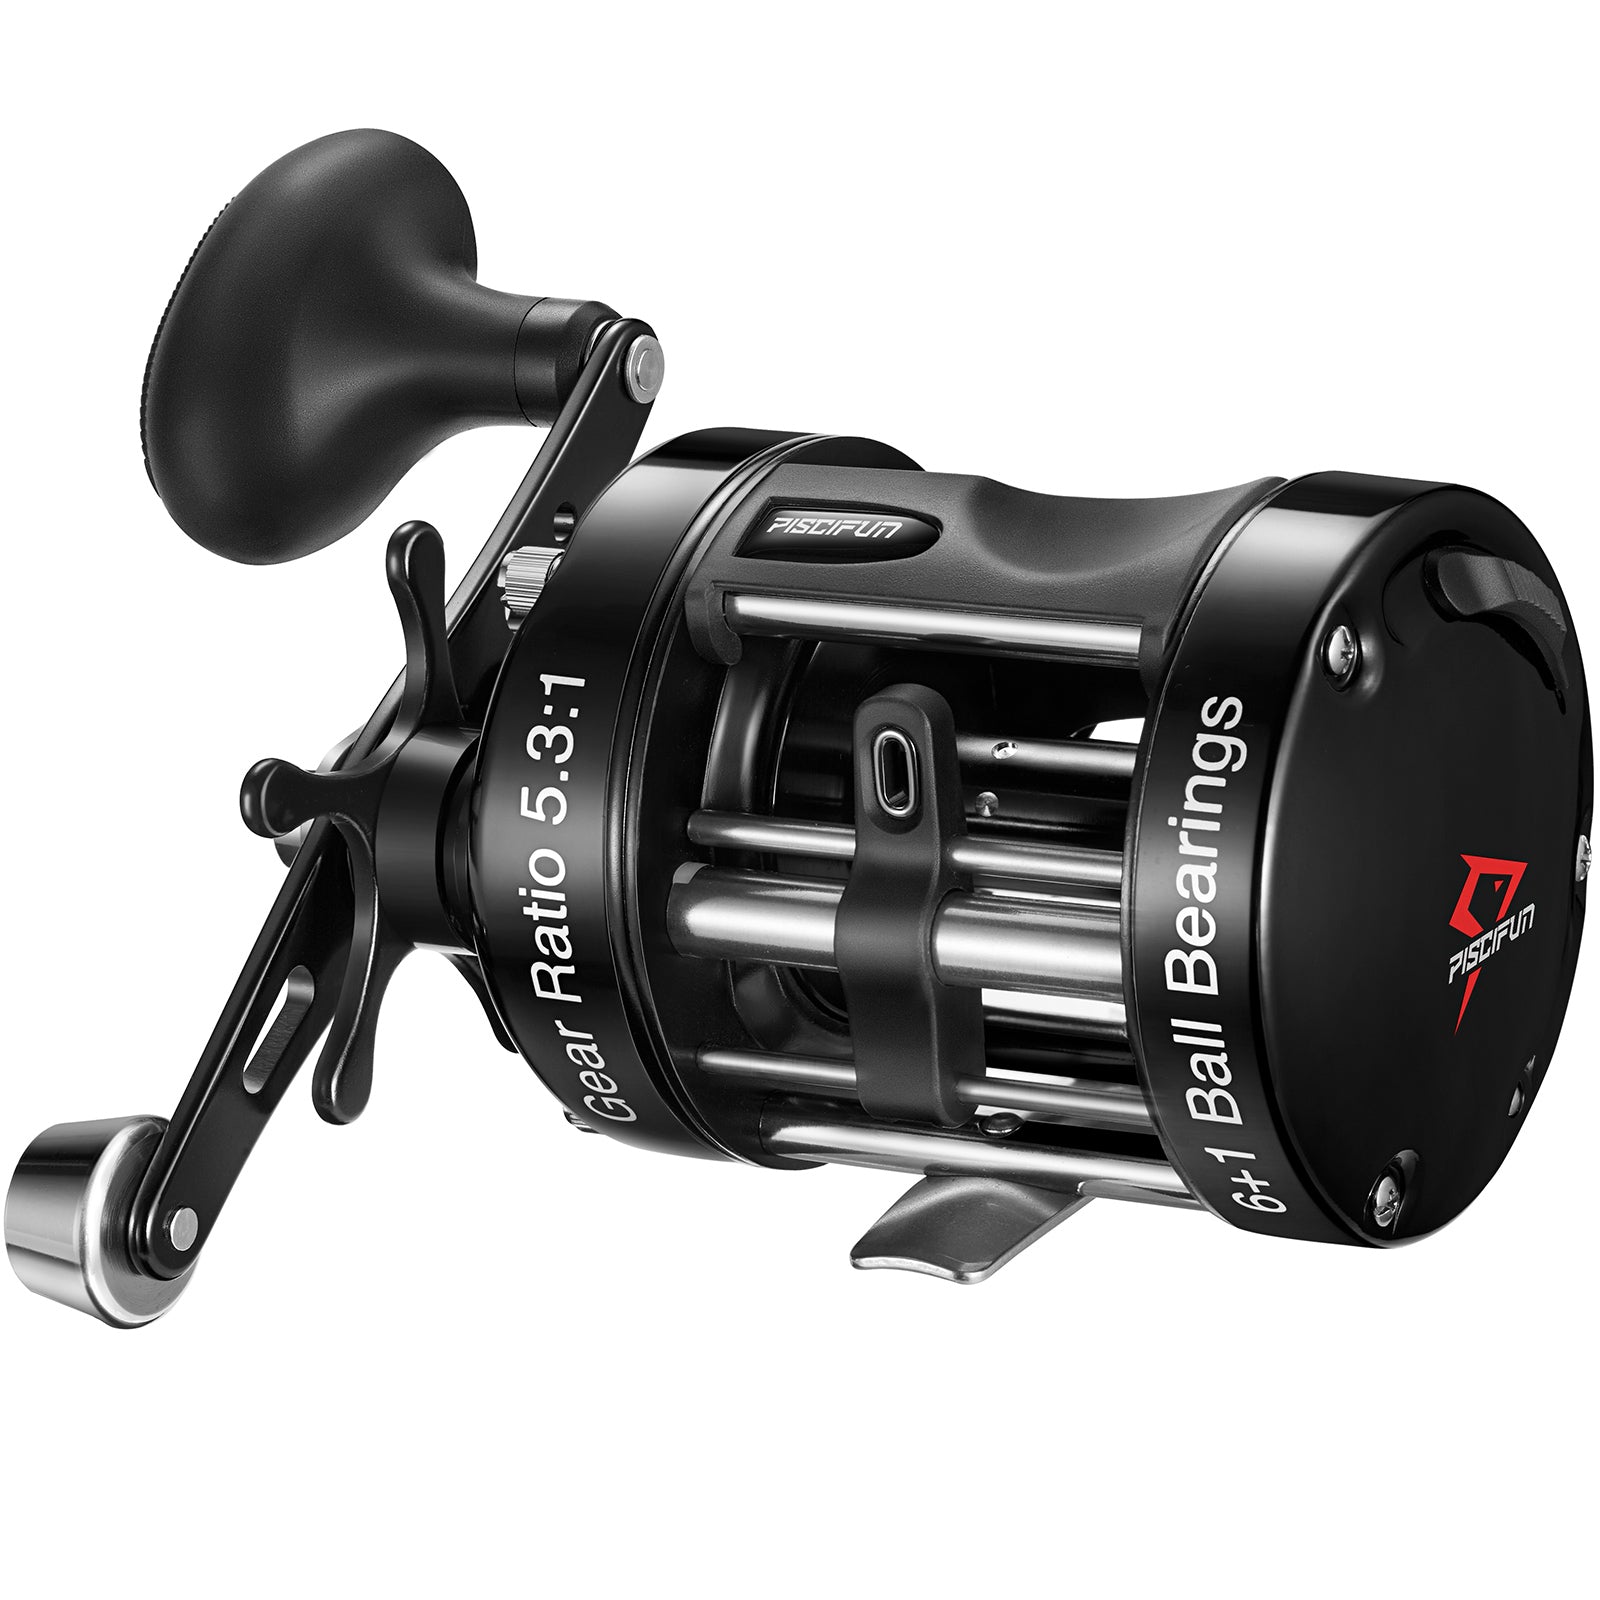 Fishing round Baitcasting Conventional Reel Reinforced Right Hand